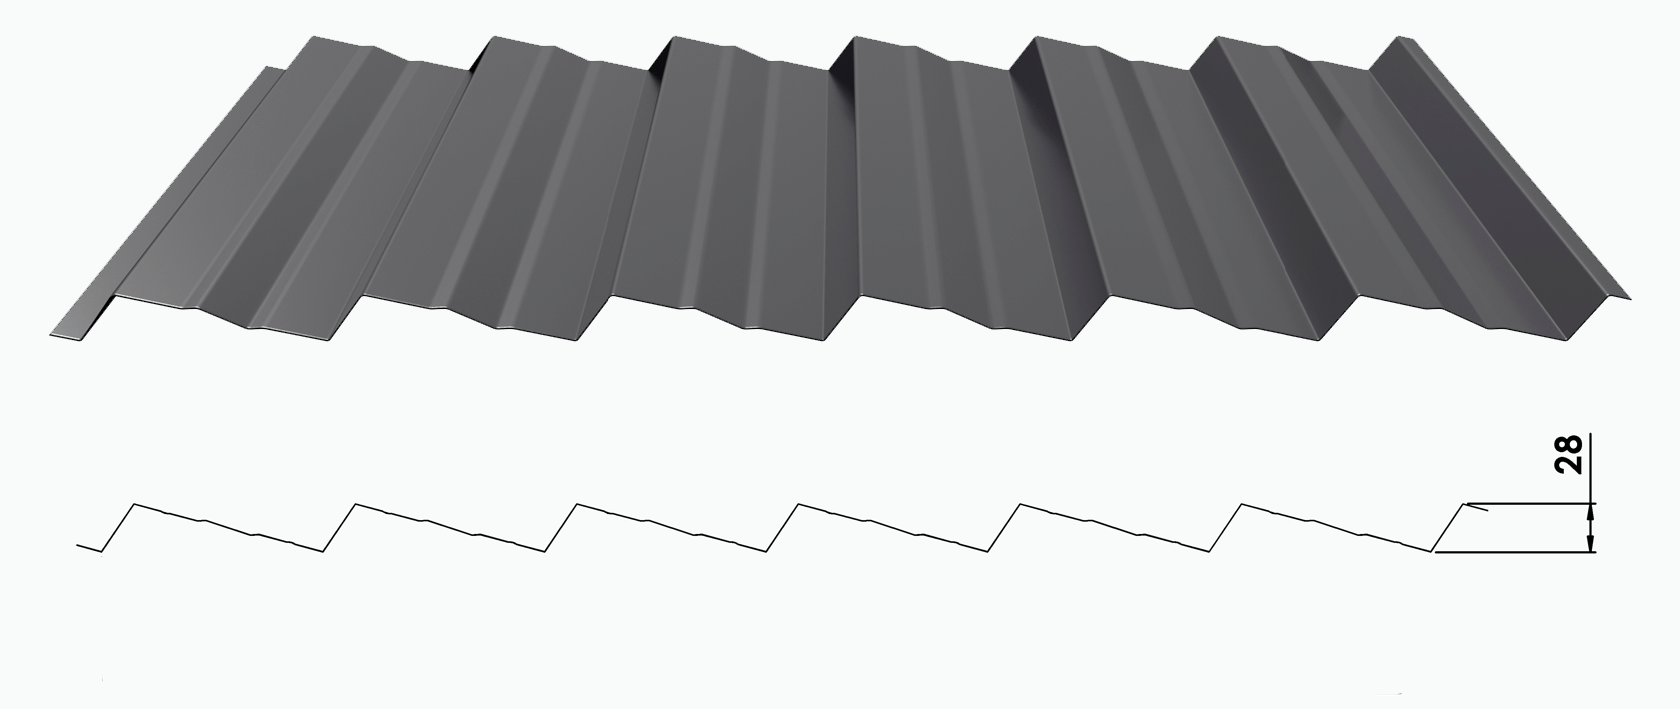 Render showing a 3D render image of the metzag metfence and a line drawing of the profile